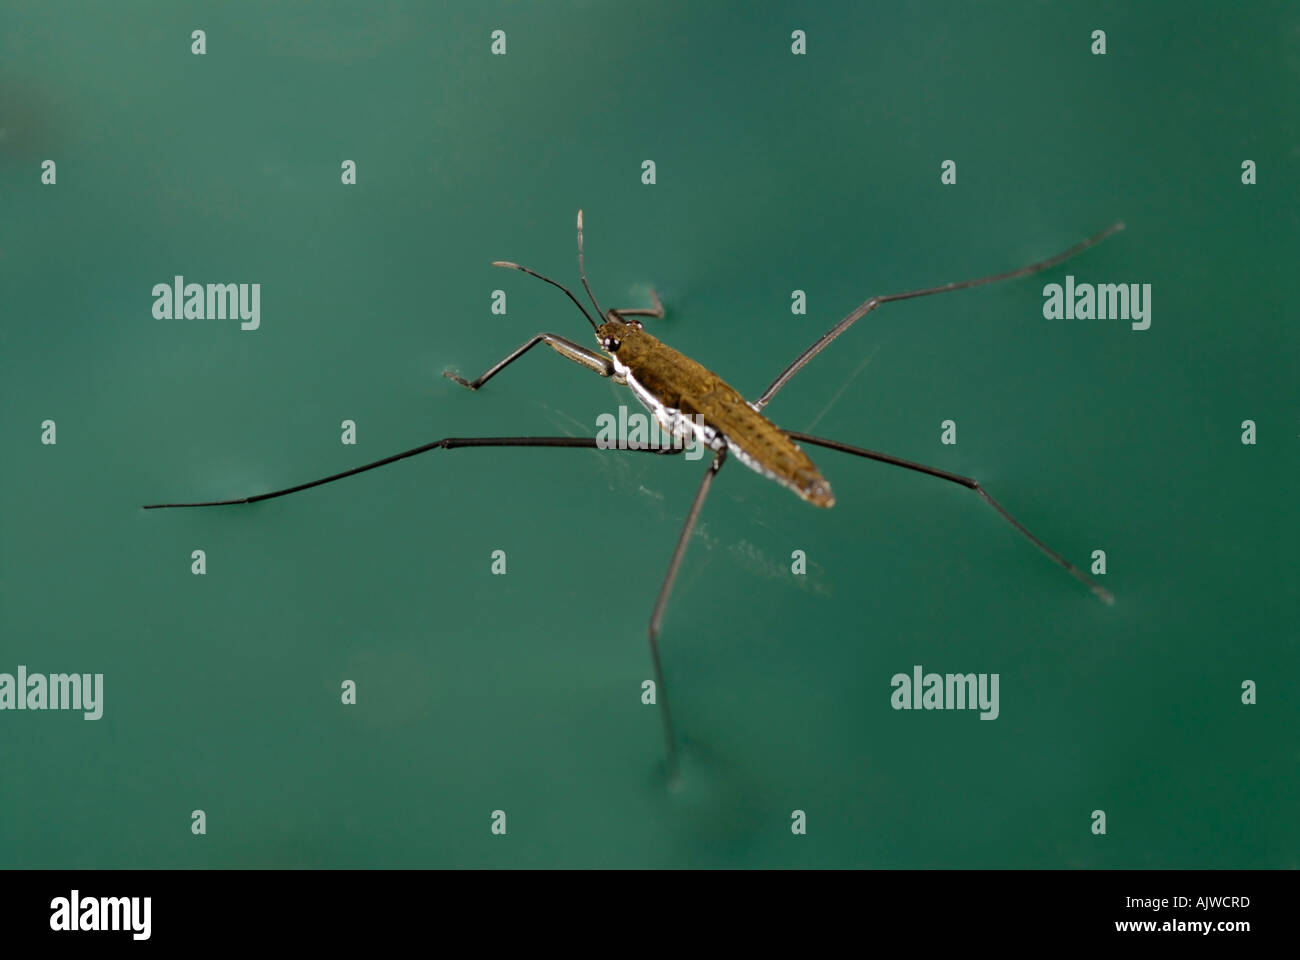 Water strider, Gerris remigis, using surface tension to walk on water Stock Photo